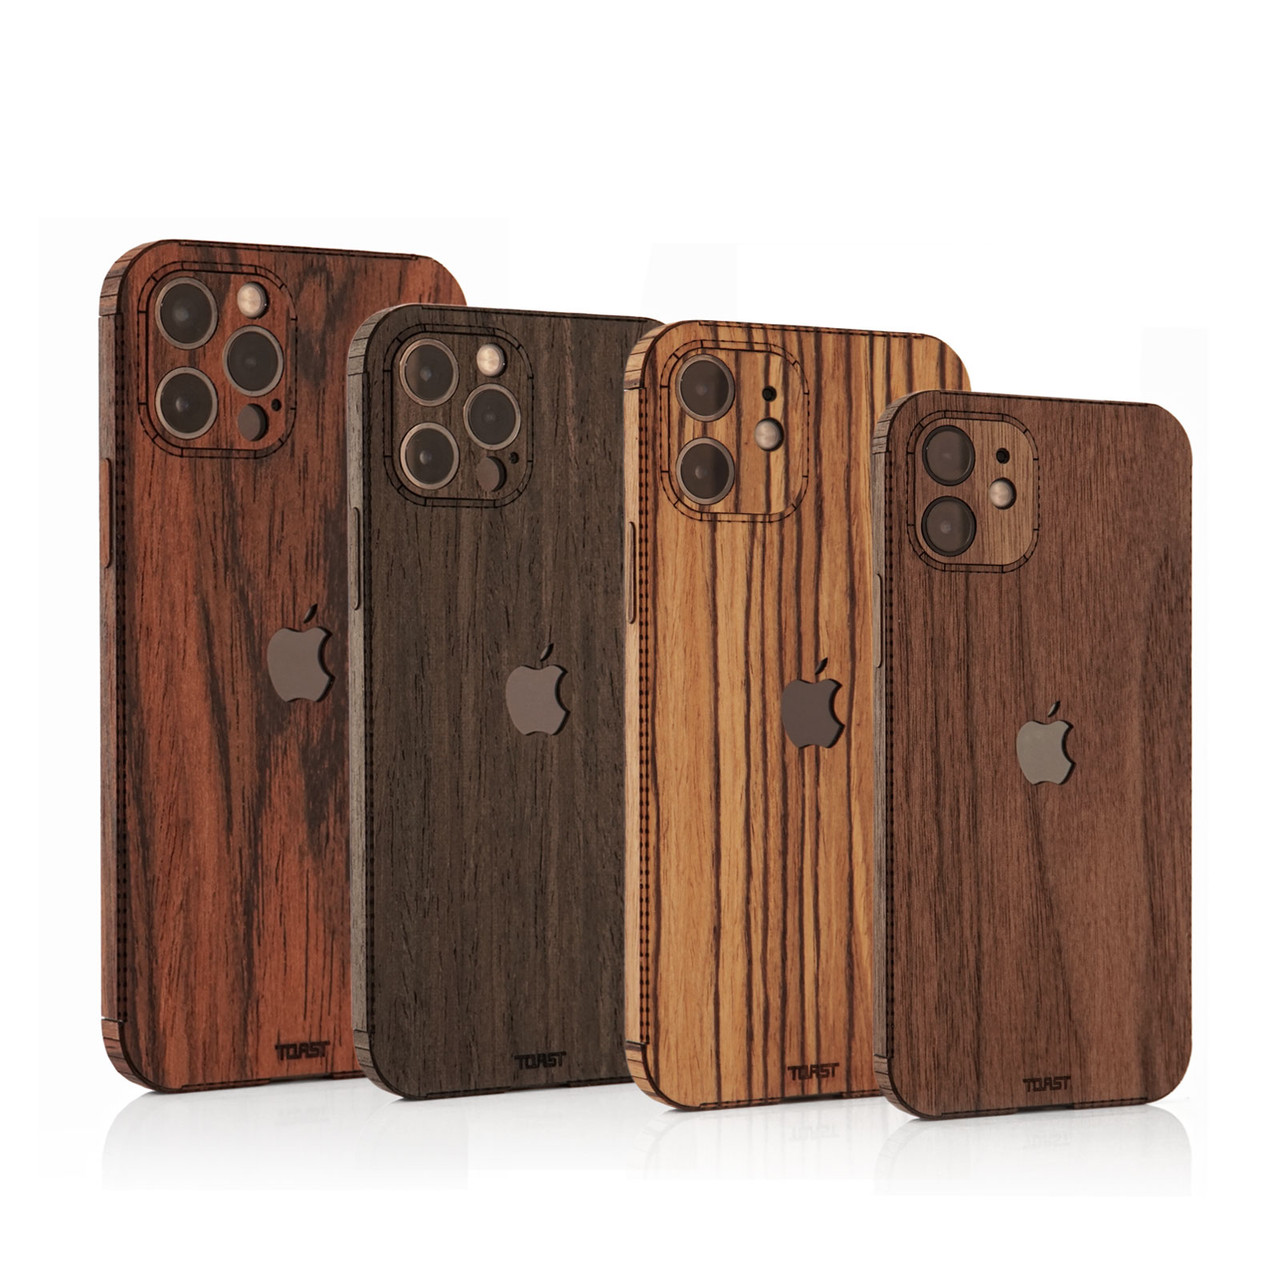 Toast Wood Cover for iPhone 13, 13 mini, 13 Pro, 13 Pro Max